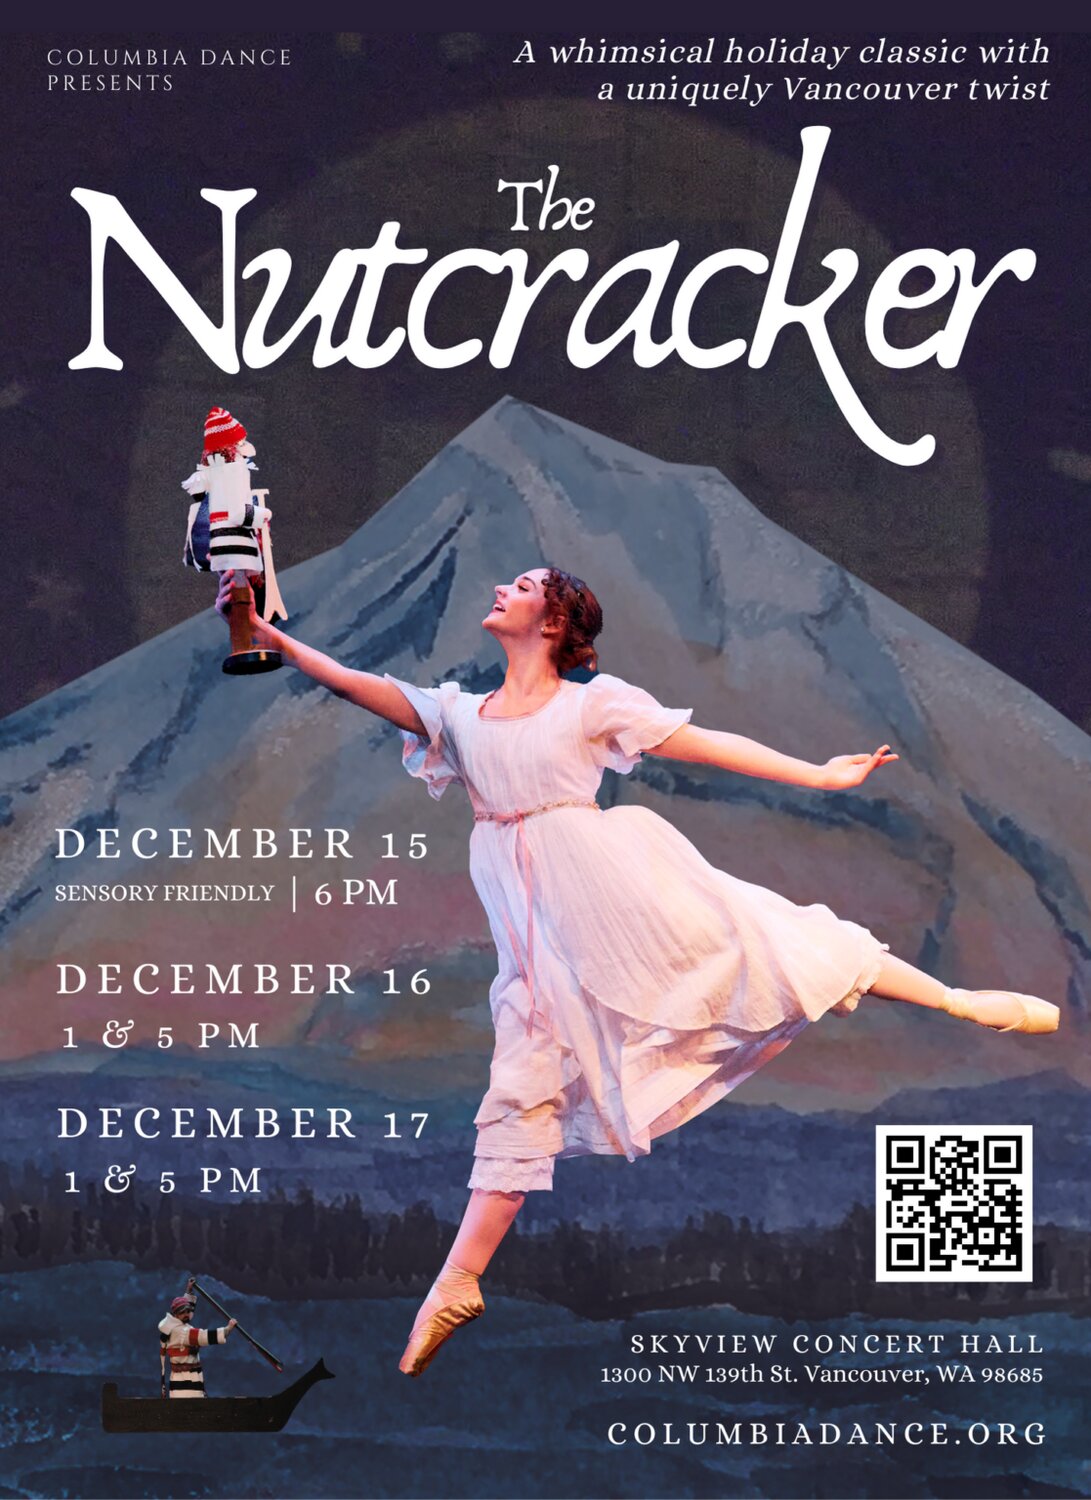 Friday evening’s showing of the Fort Vancouver-inspired “The Nutcracker” by the Columbia Ballet will be a sensory-friendly performance. Go to columbiadance.org for more information or tickets.